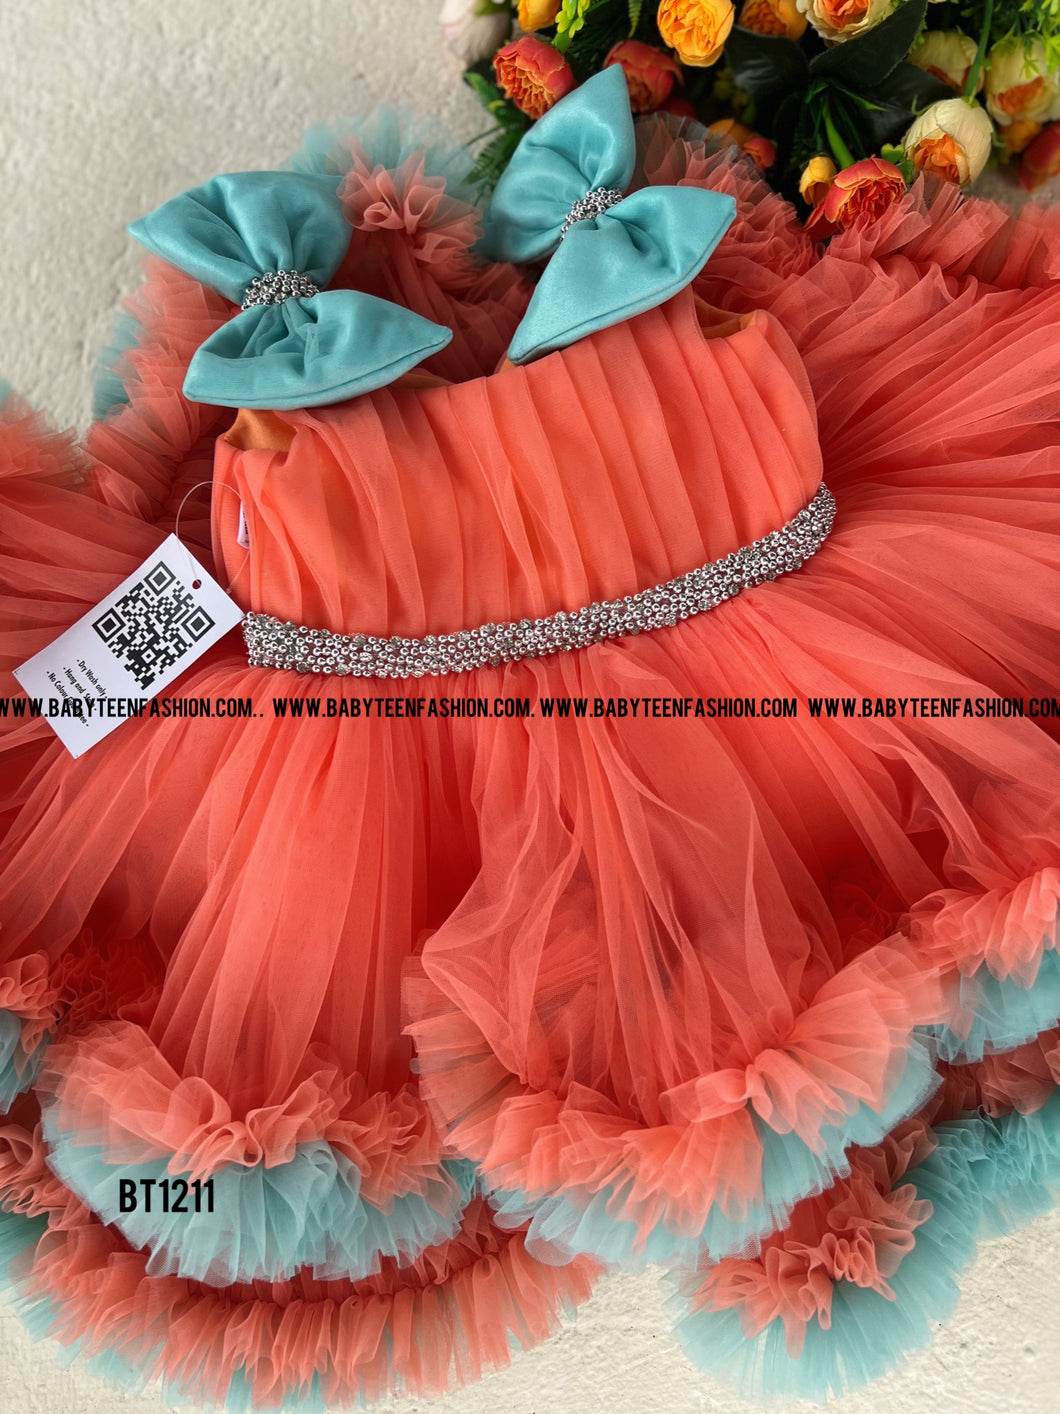 BT1211 Double Ruffle Birthday Frock Shoulder Bow